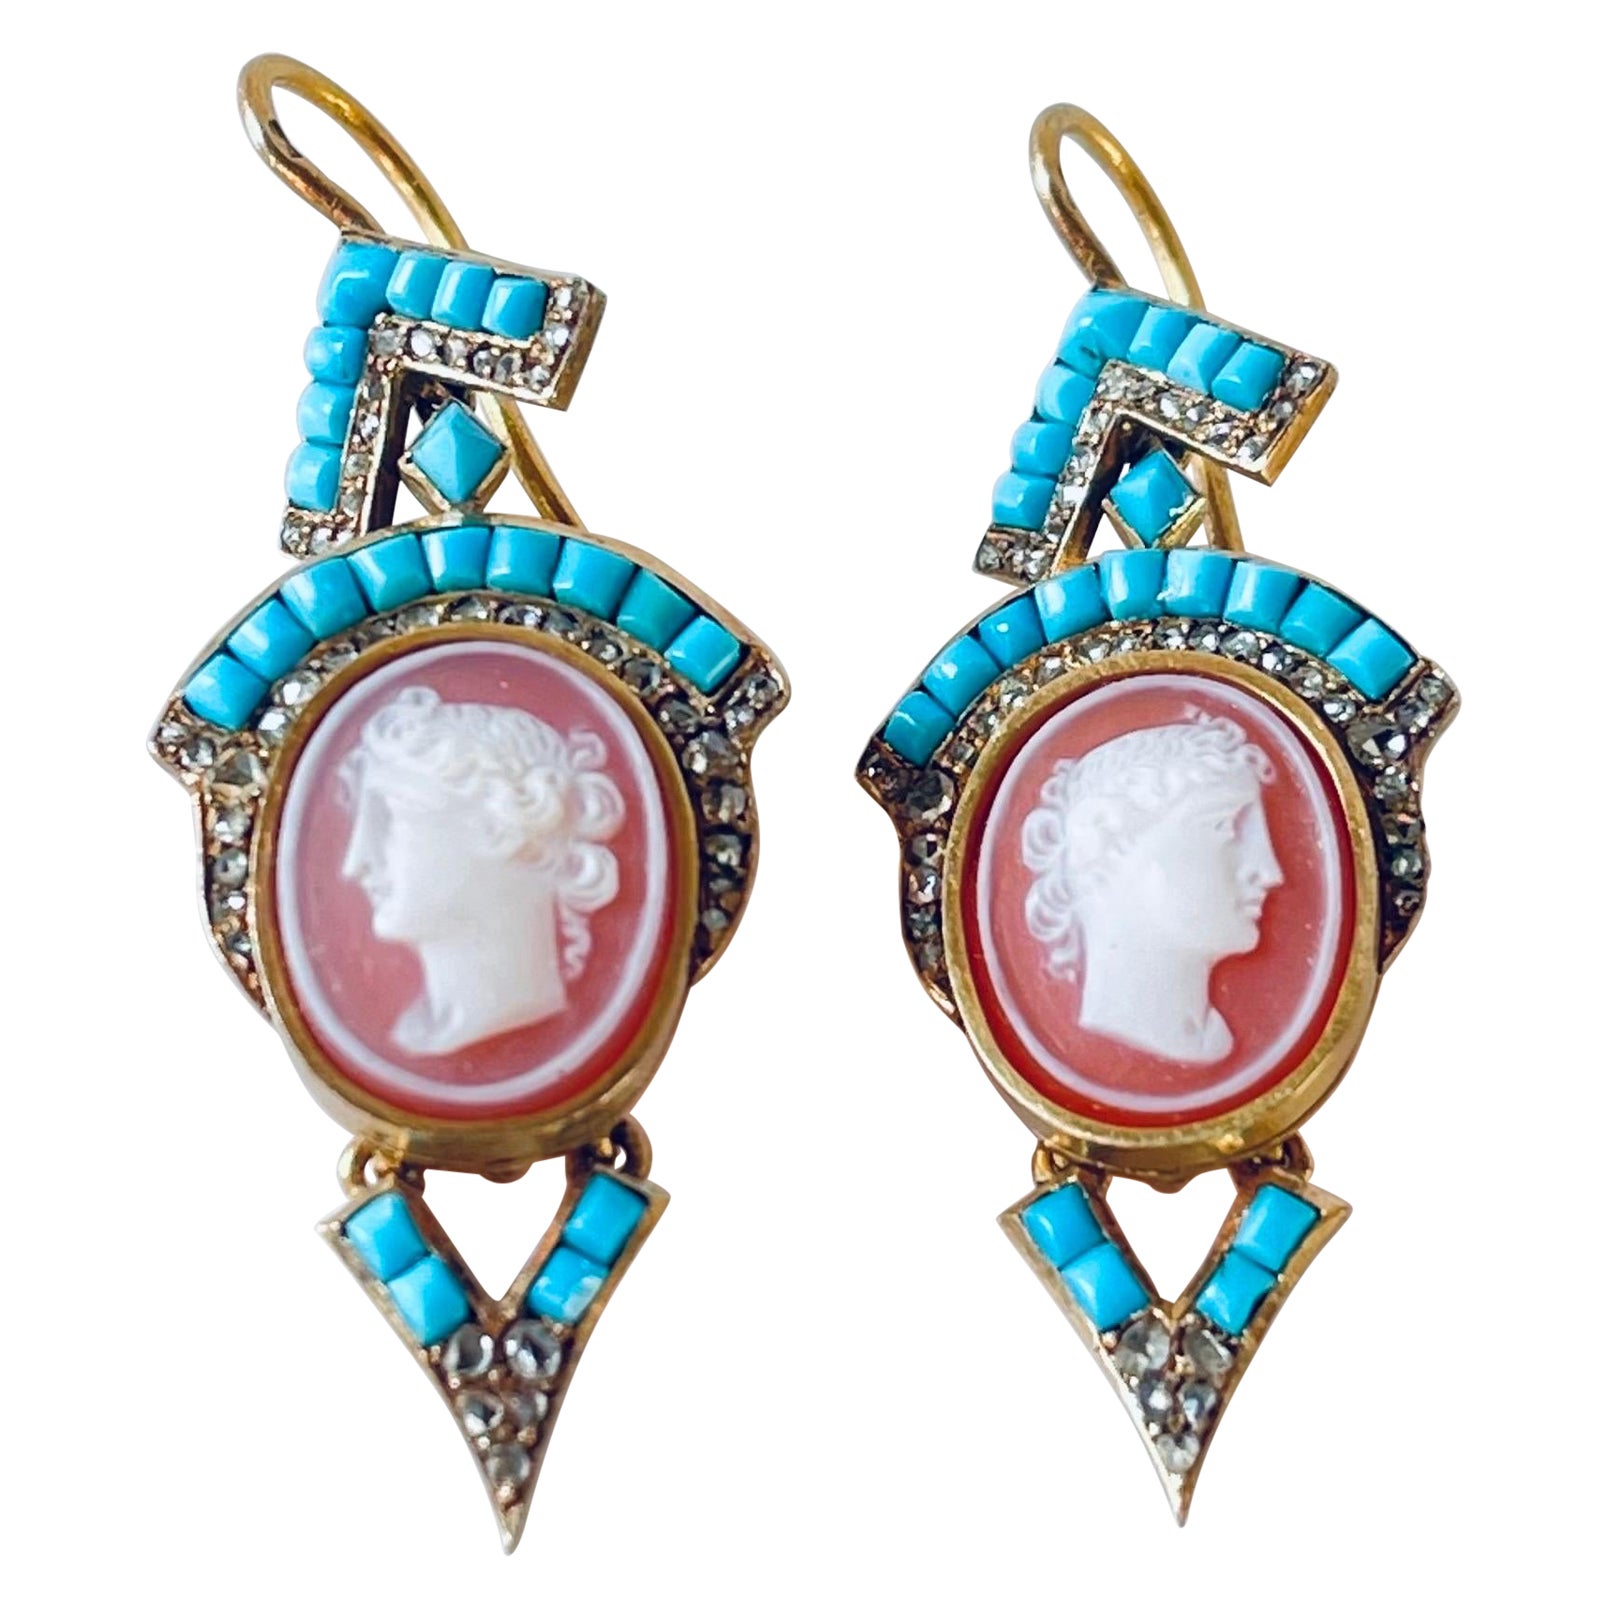 Antique French 18K Gold Diamond Turquoise Cameo Long Pendant Earrings C 1880 For Sale